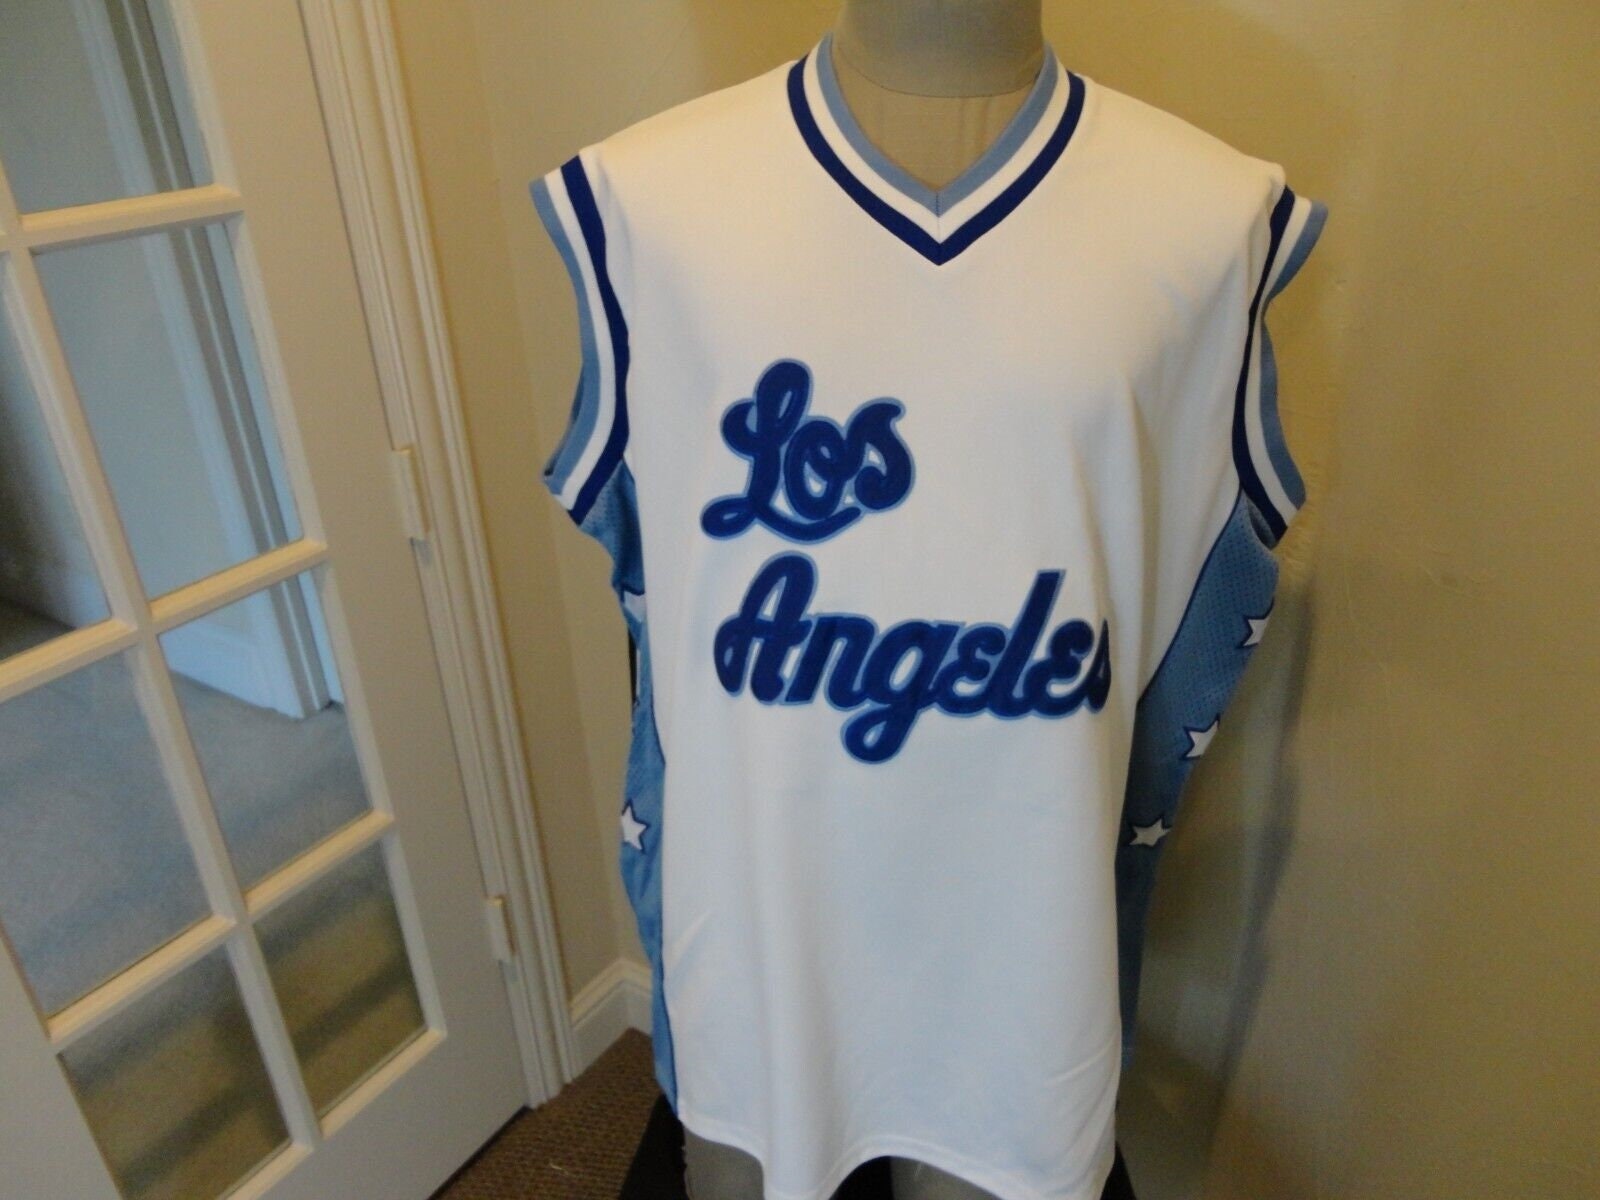 Vintage Los Angeles Lakers Baseball Jersey L – Laundry